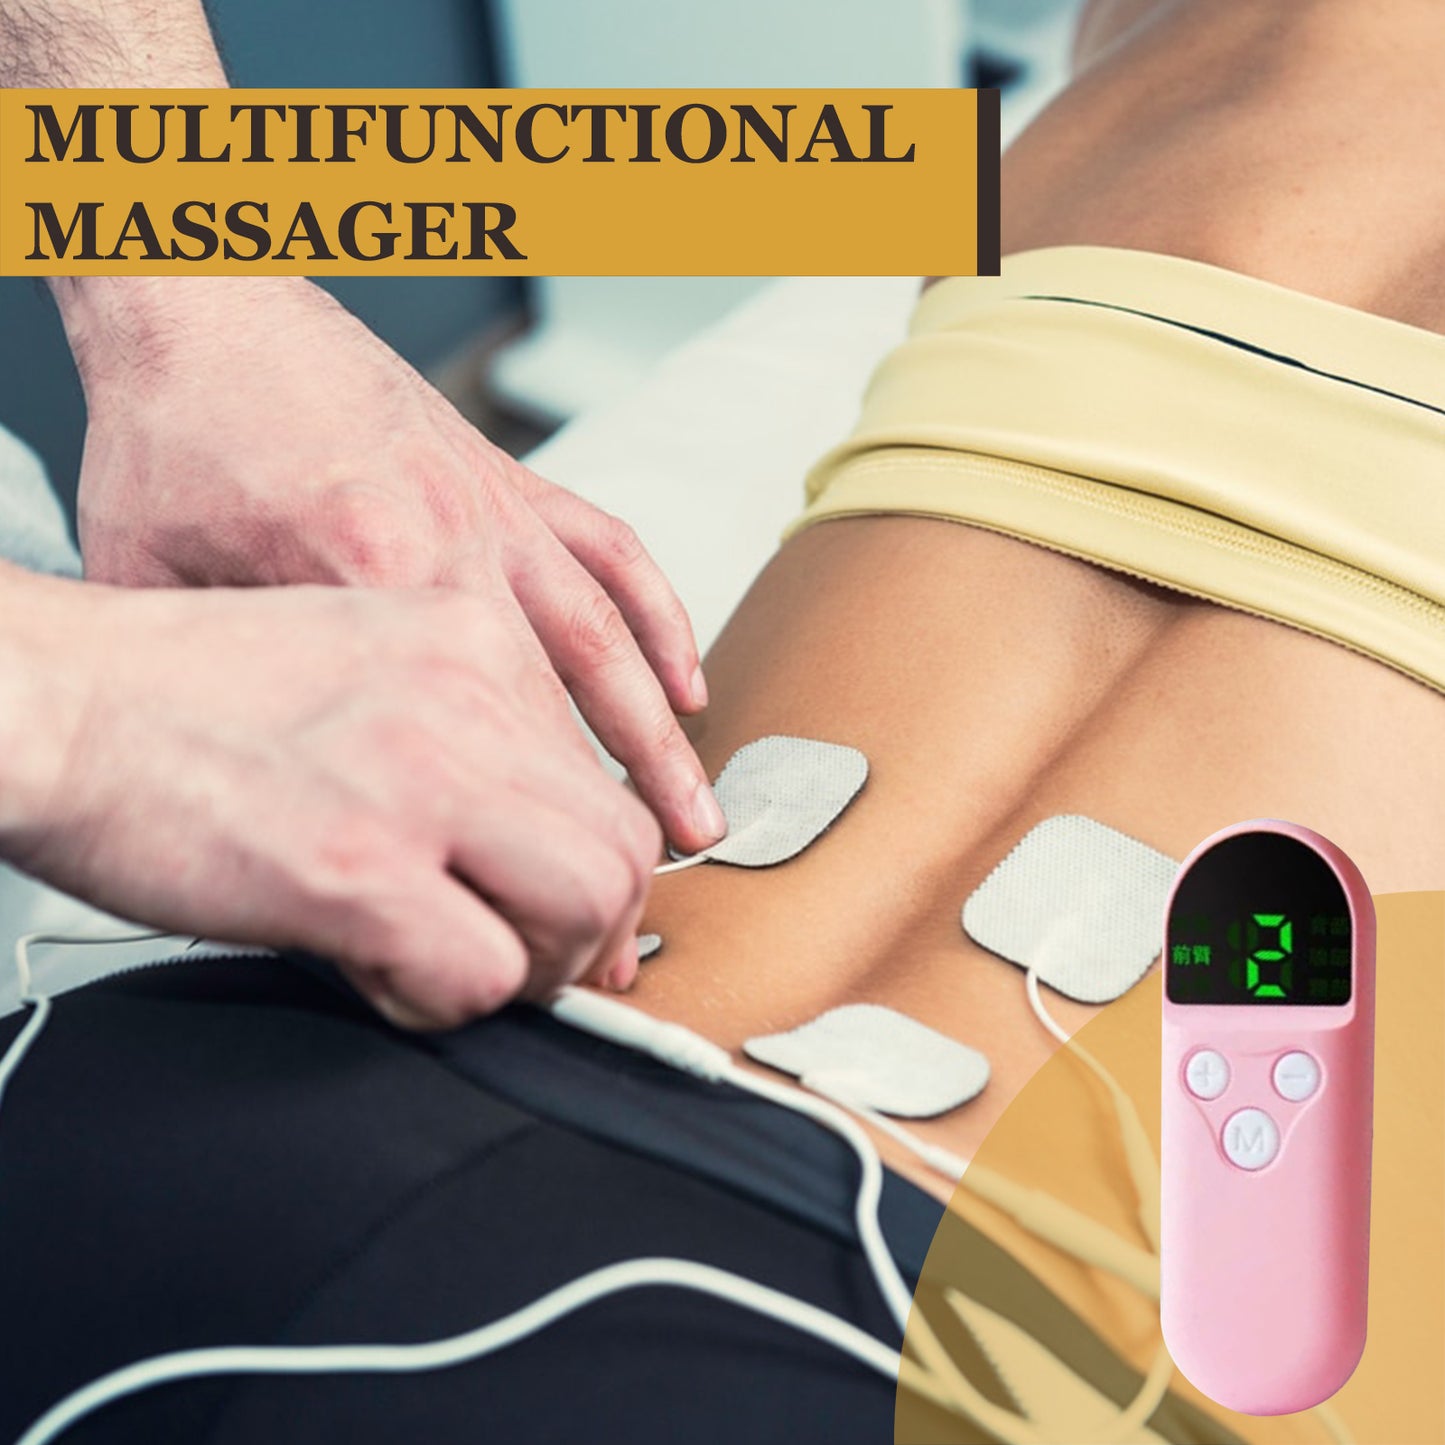 Muscle Strength Stimulators for Pain Relief Therapy, Rechargeable Dual Channel